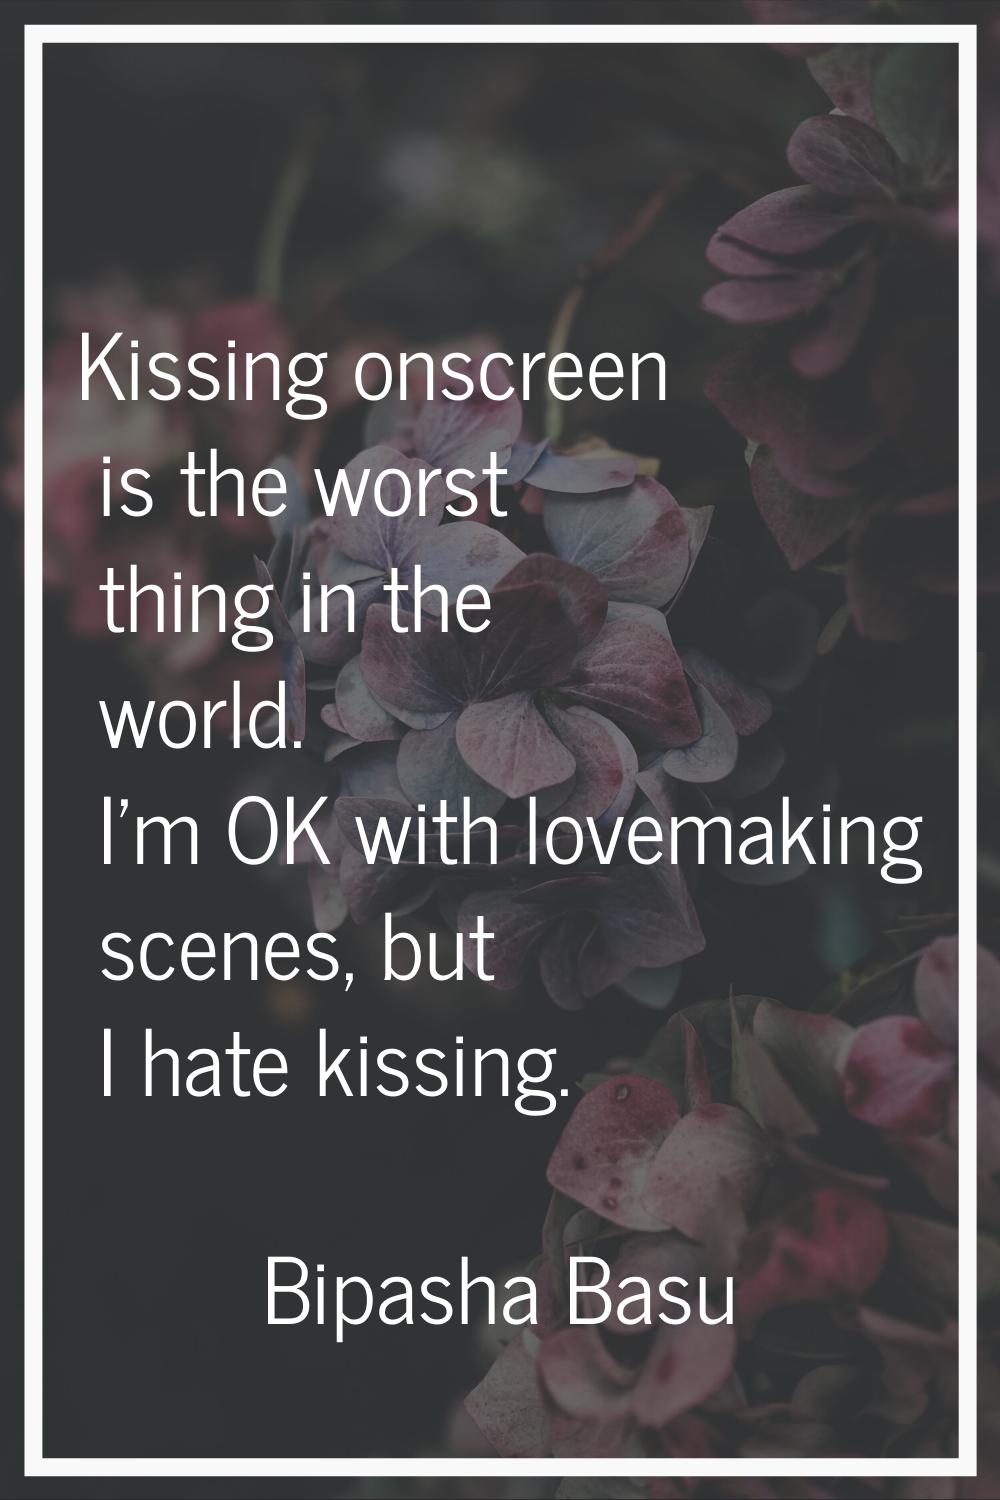 Kissing onscreen is the worst thing in the world. I'm OK with lovemaking scenes, but I hate kissing